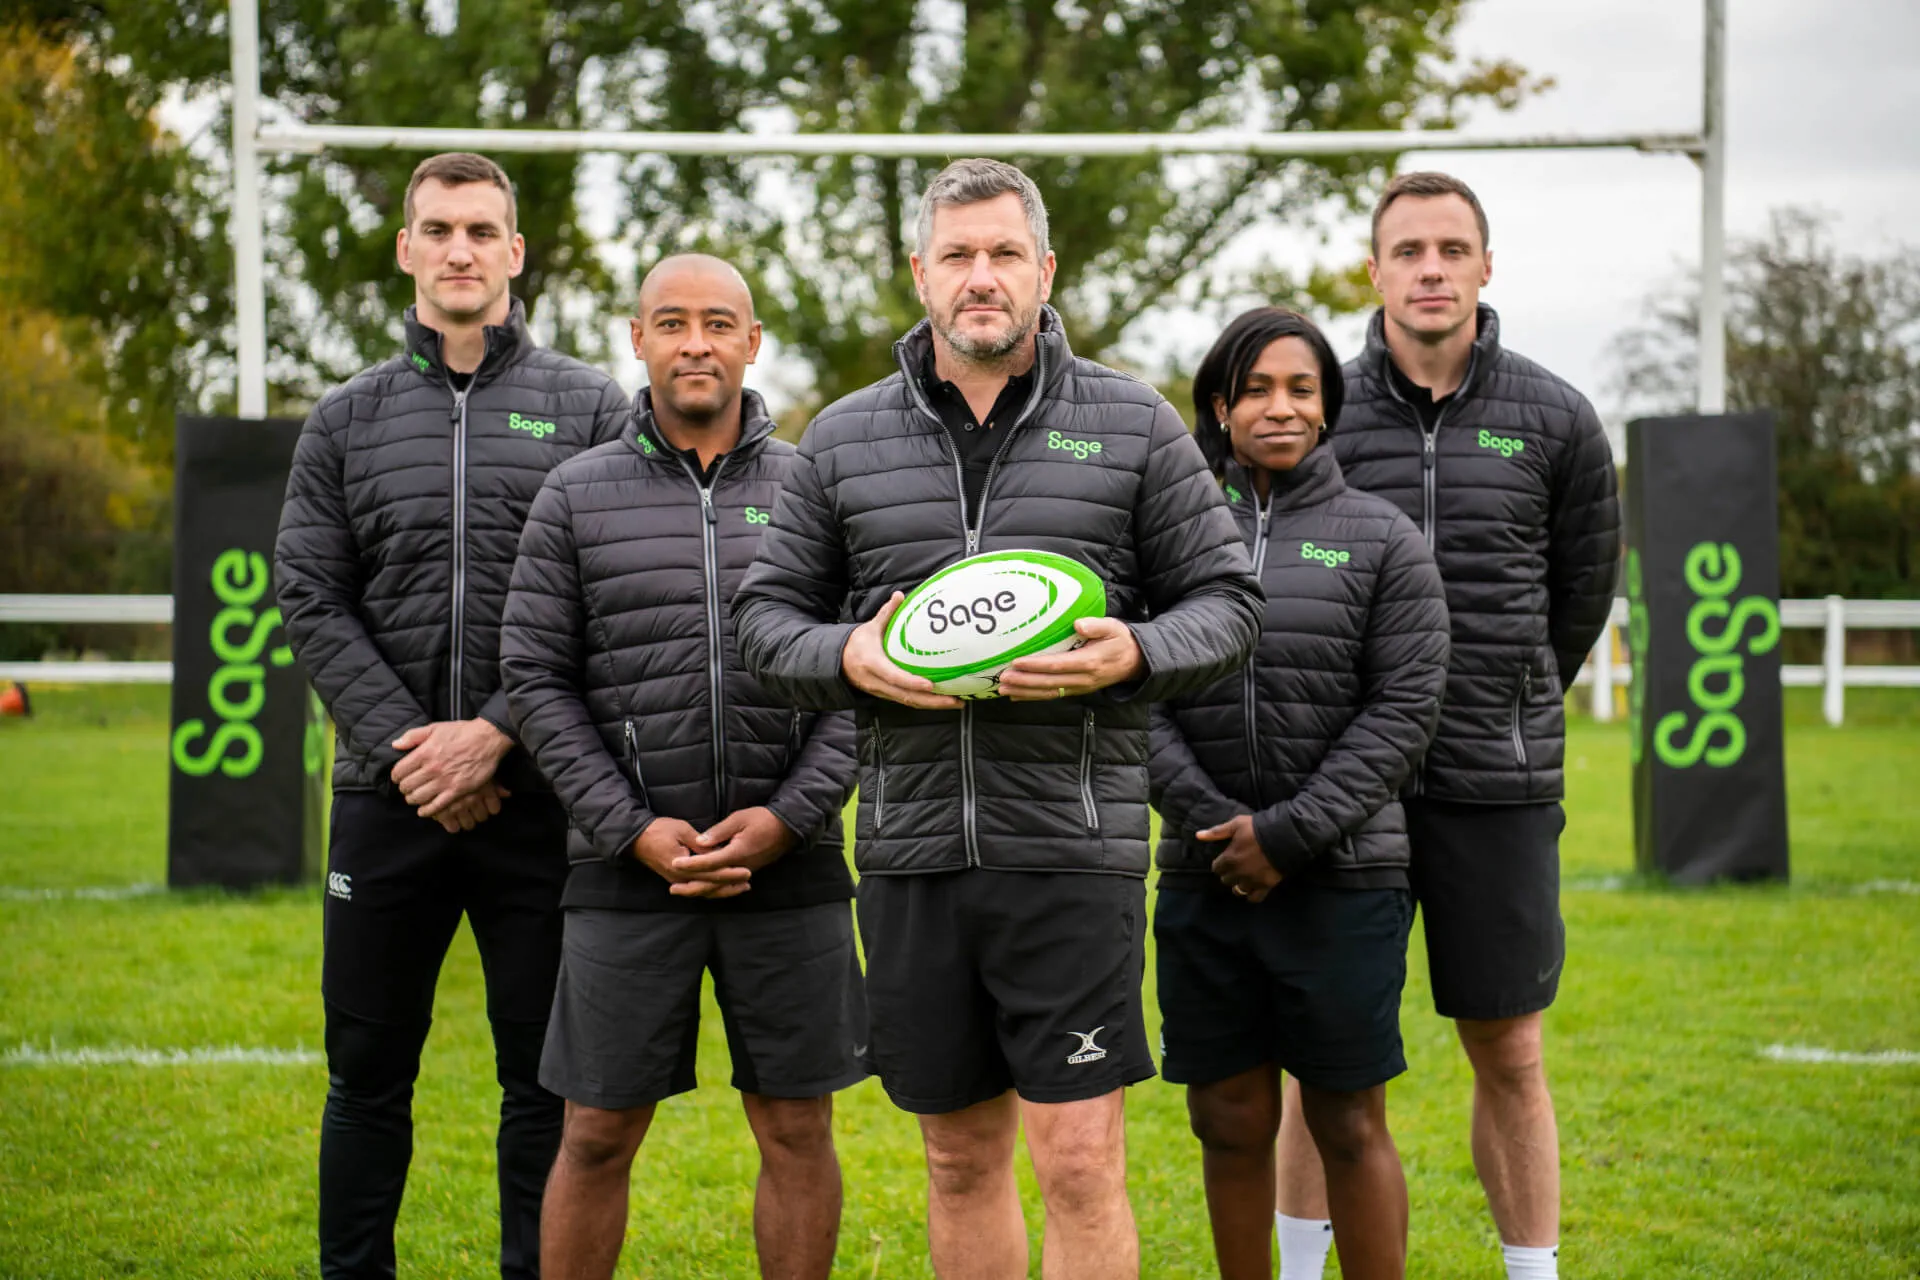 Six Nations Rugby has named Sage as its official insights partner.